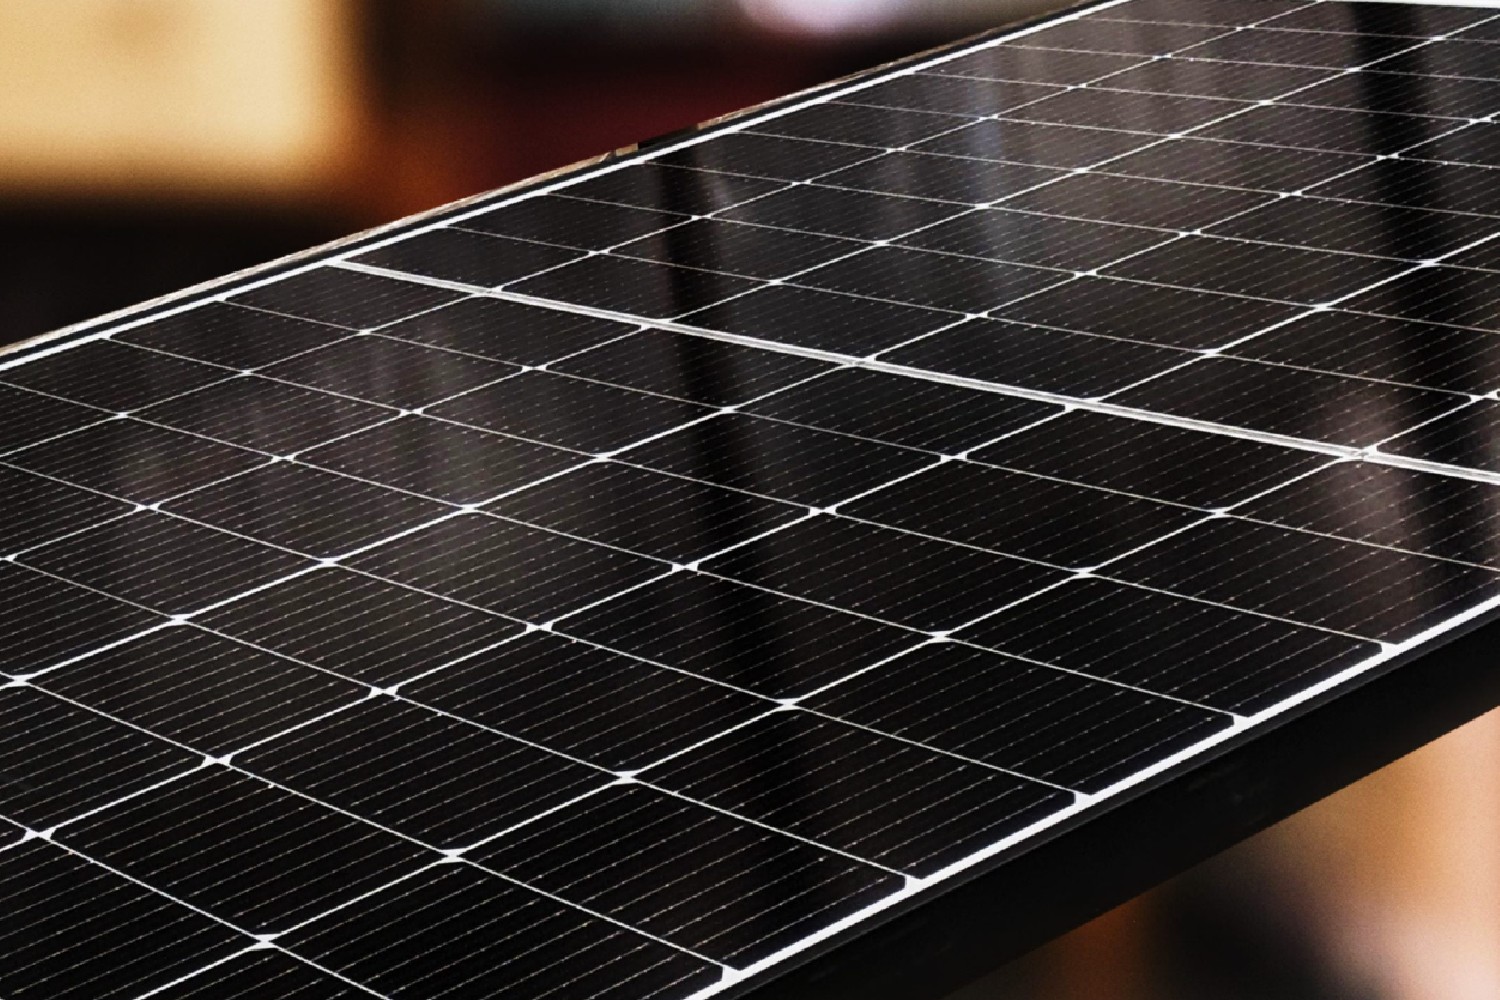 EXCLUSIVE DEALS - LIMITED OFFERS on 425Watts Jinko Solar Panels